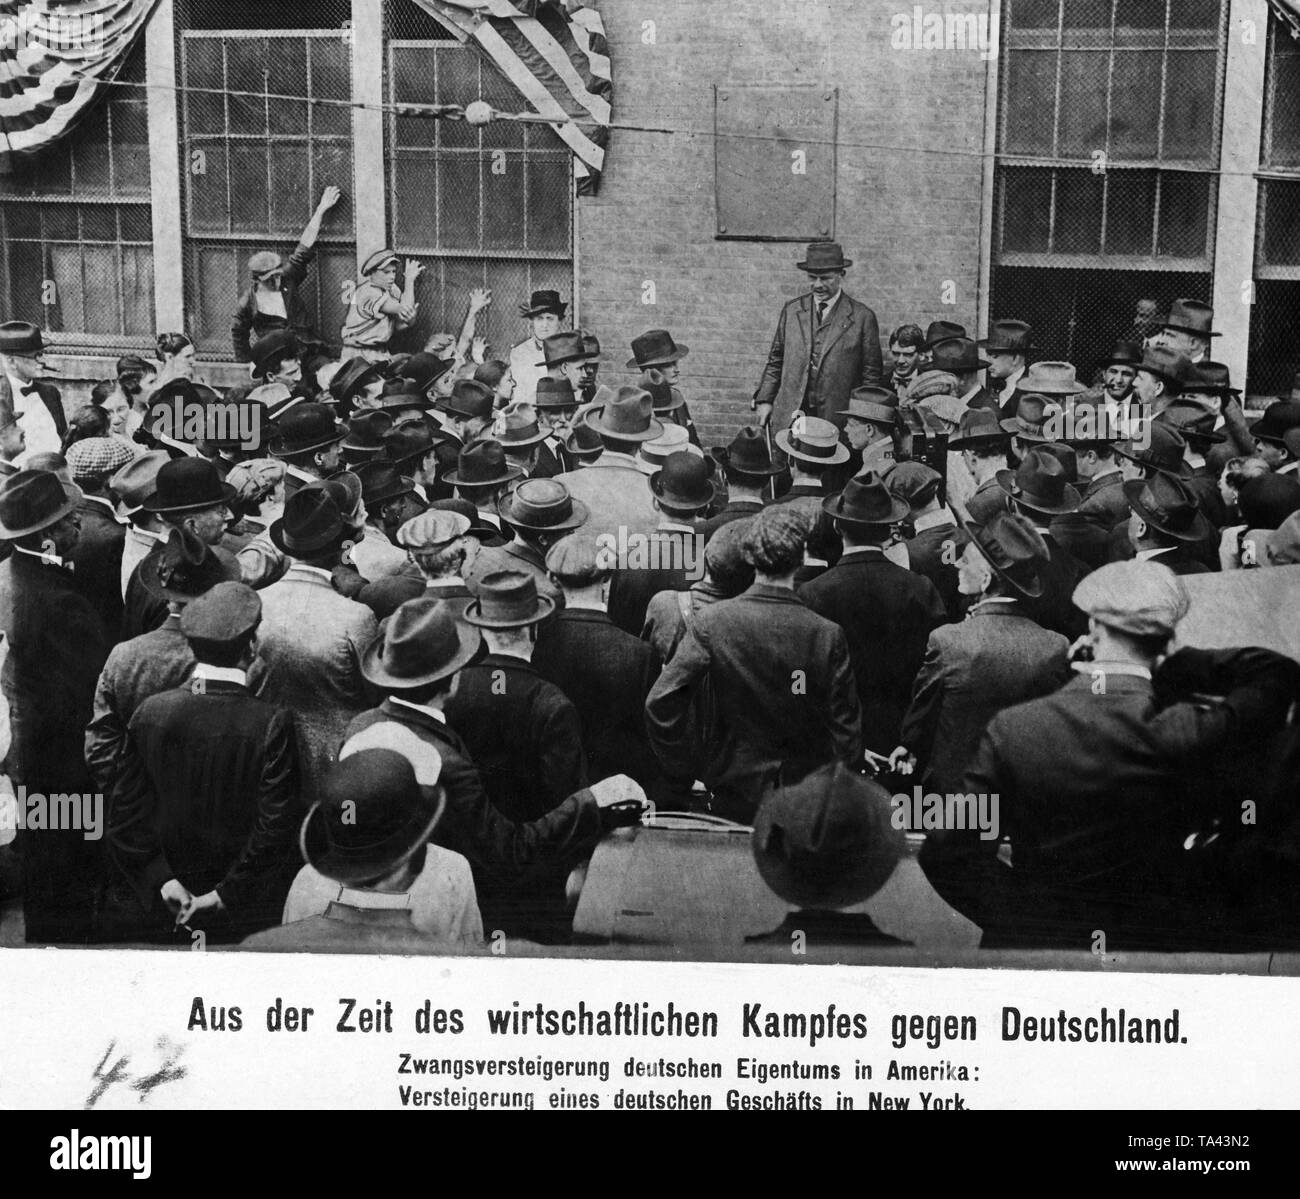 After the United States entered the war, the business of a German-born American is auctioned in New York. Stock Photo